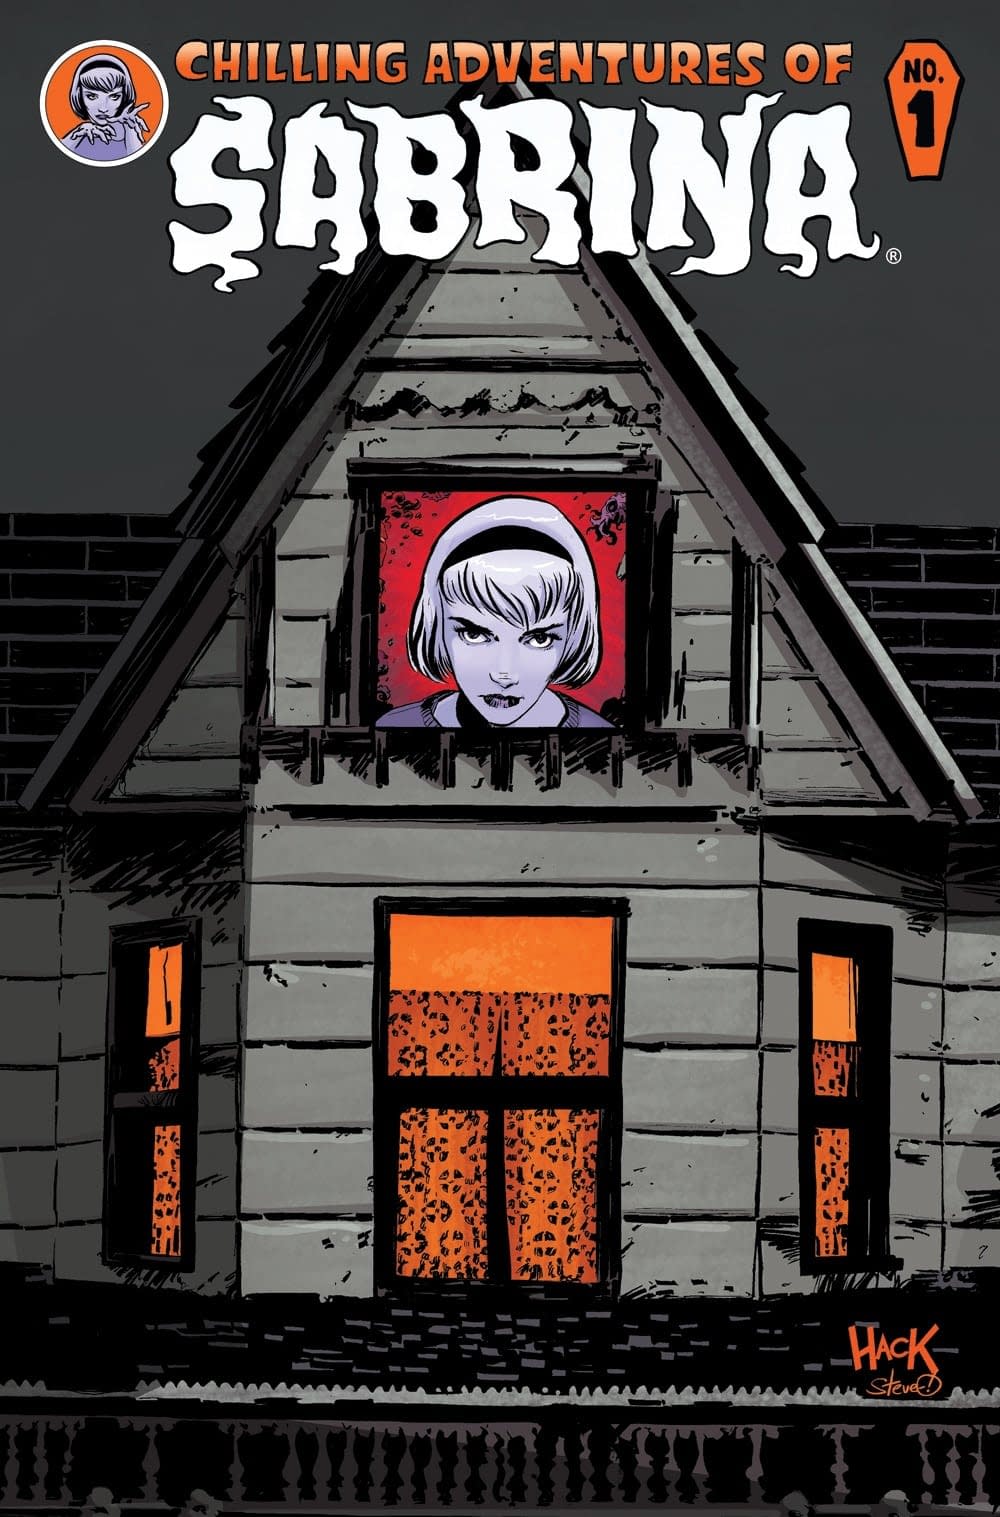 'The Chilling Adventures Of Sabrina' TV Series Coming To The CW